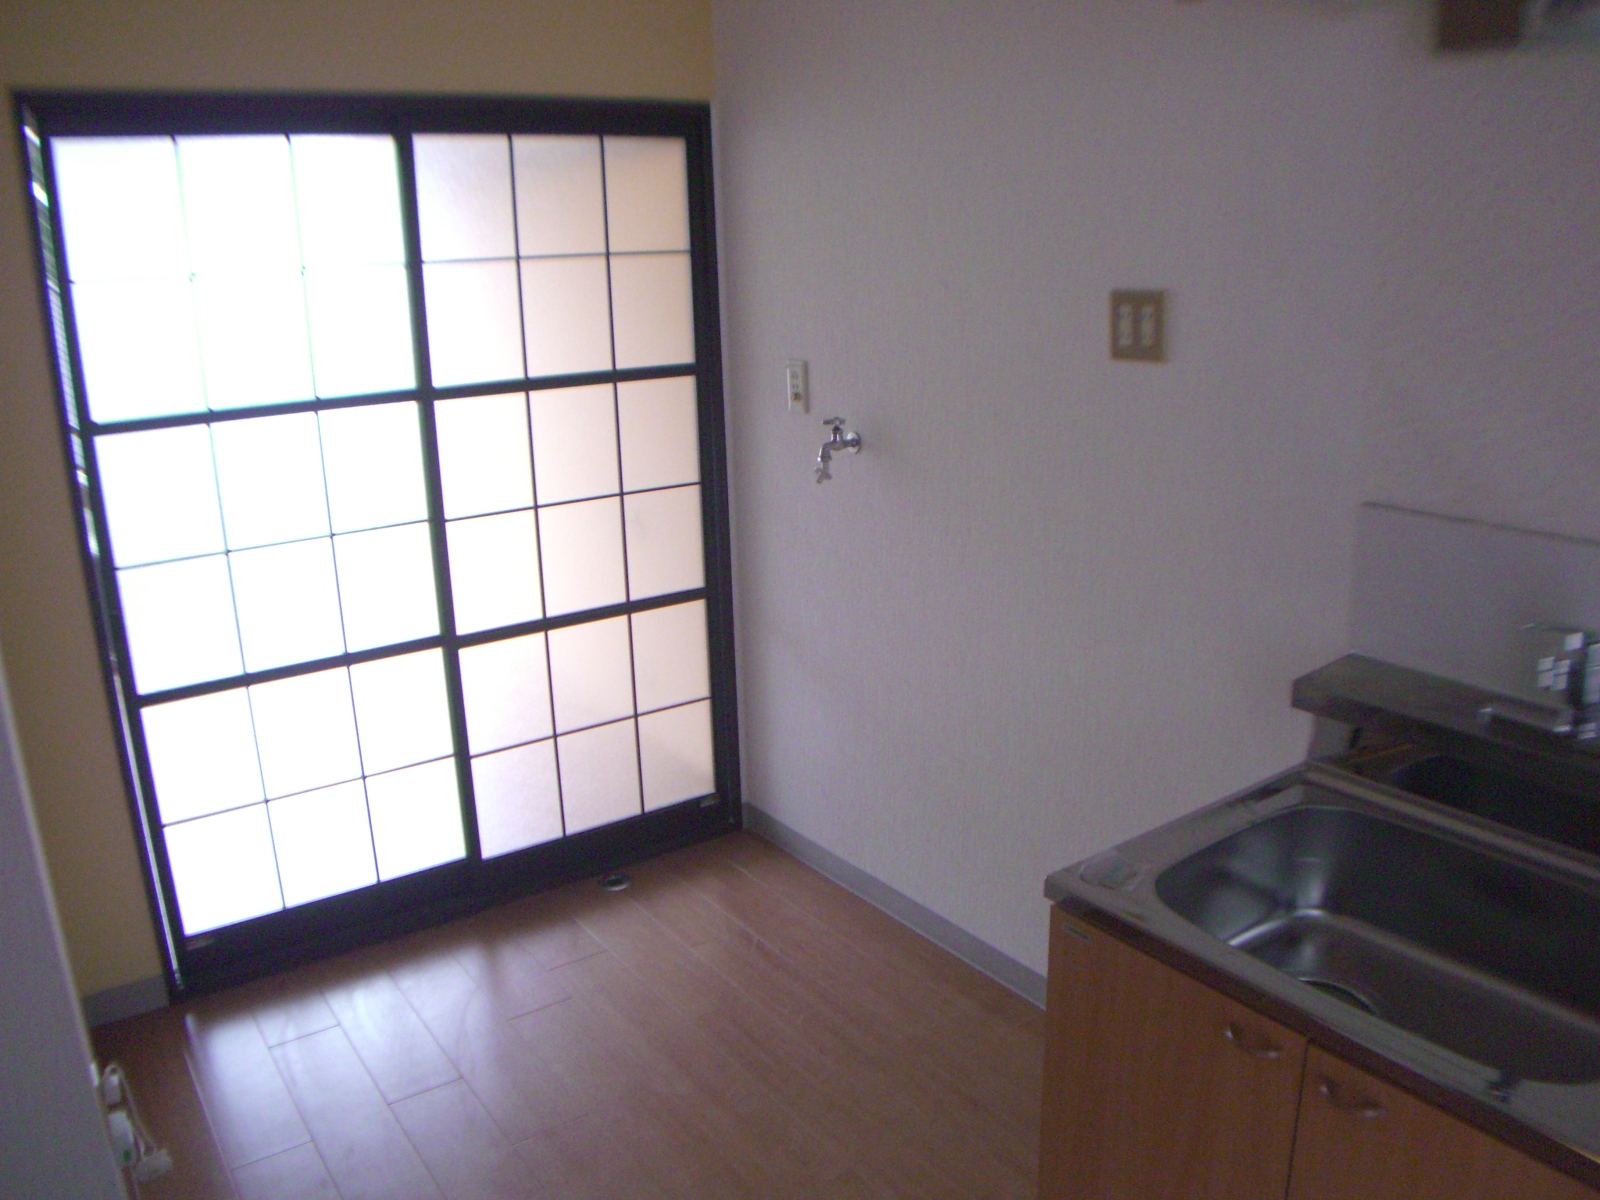 Other room space. Washing machine also put in a room (the image on the second floor)